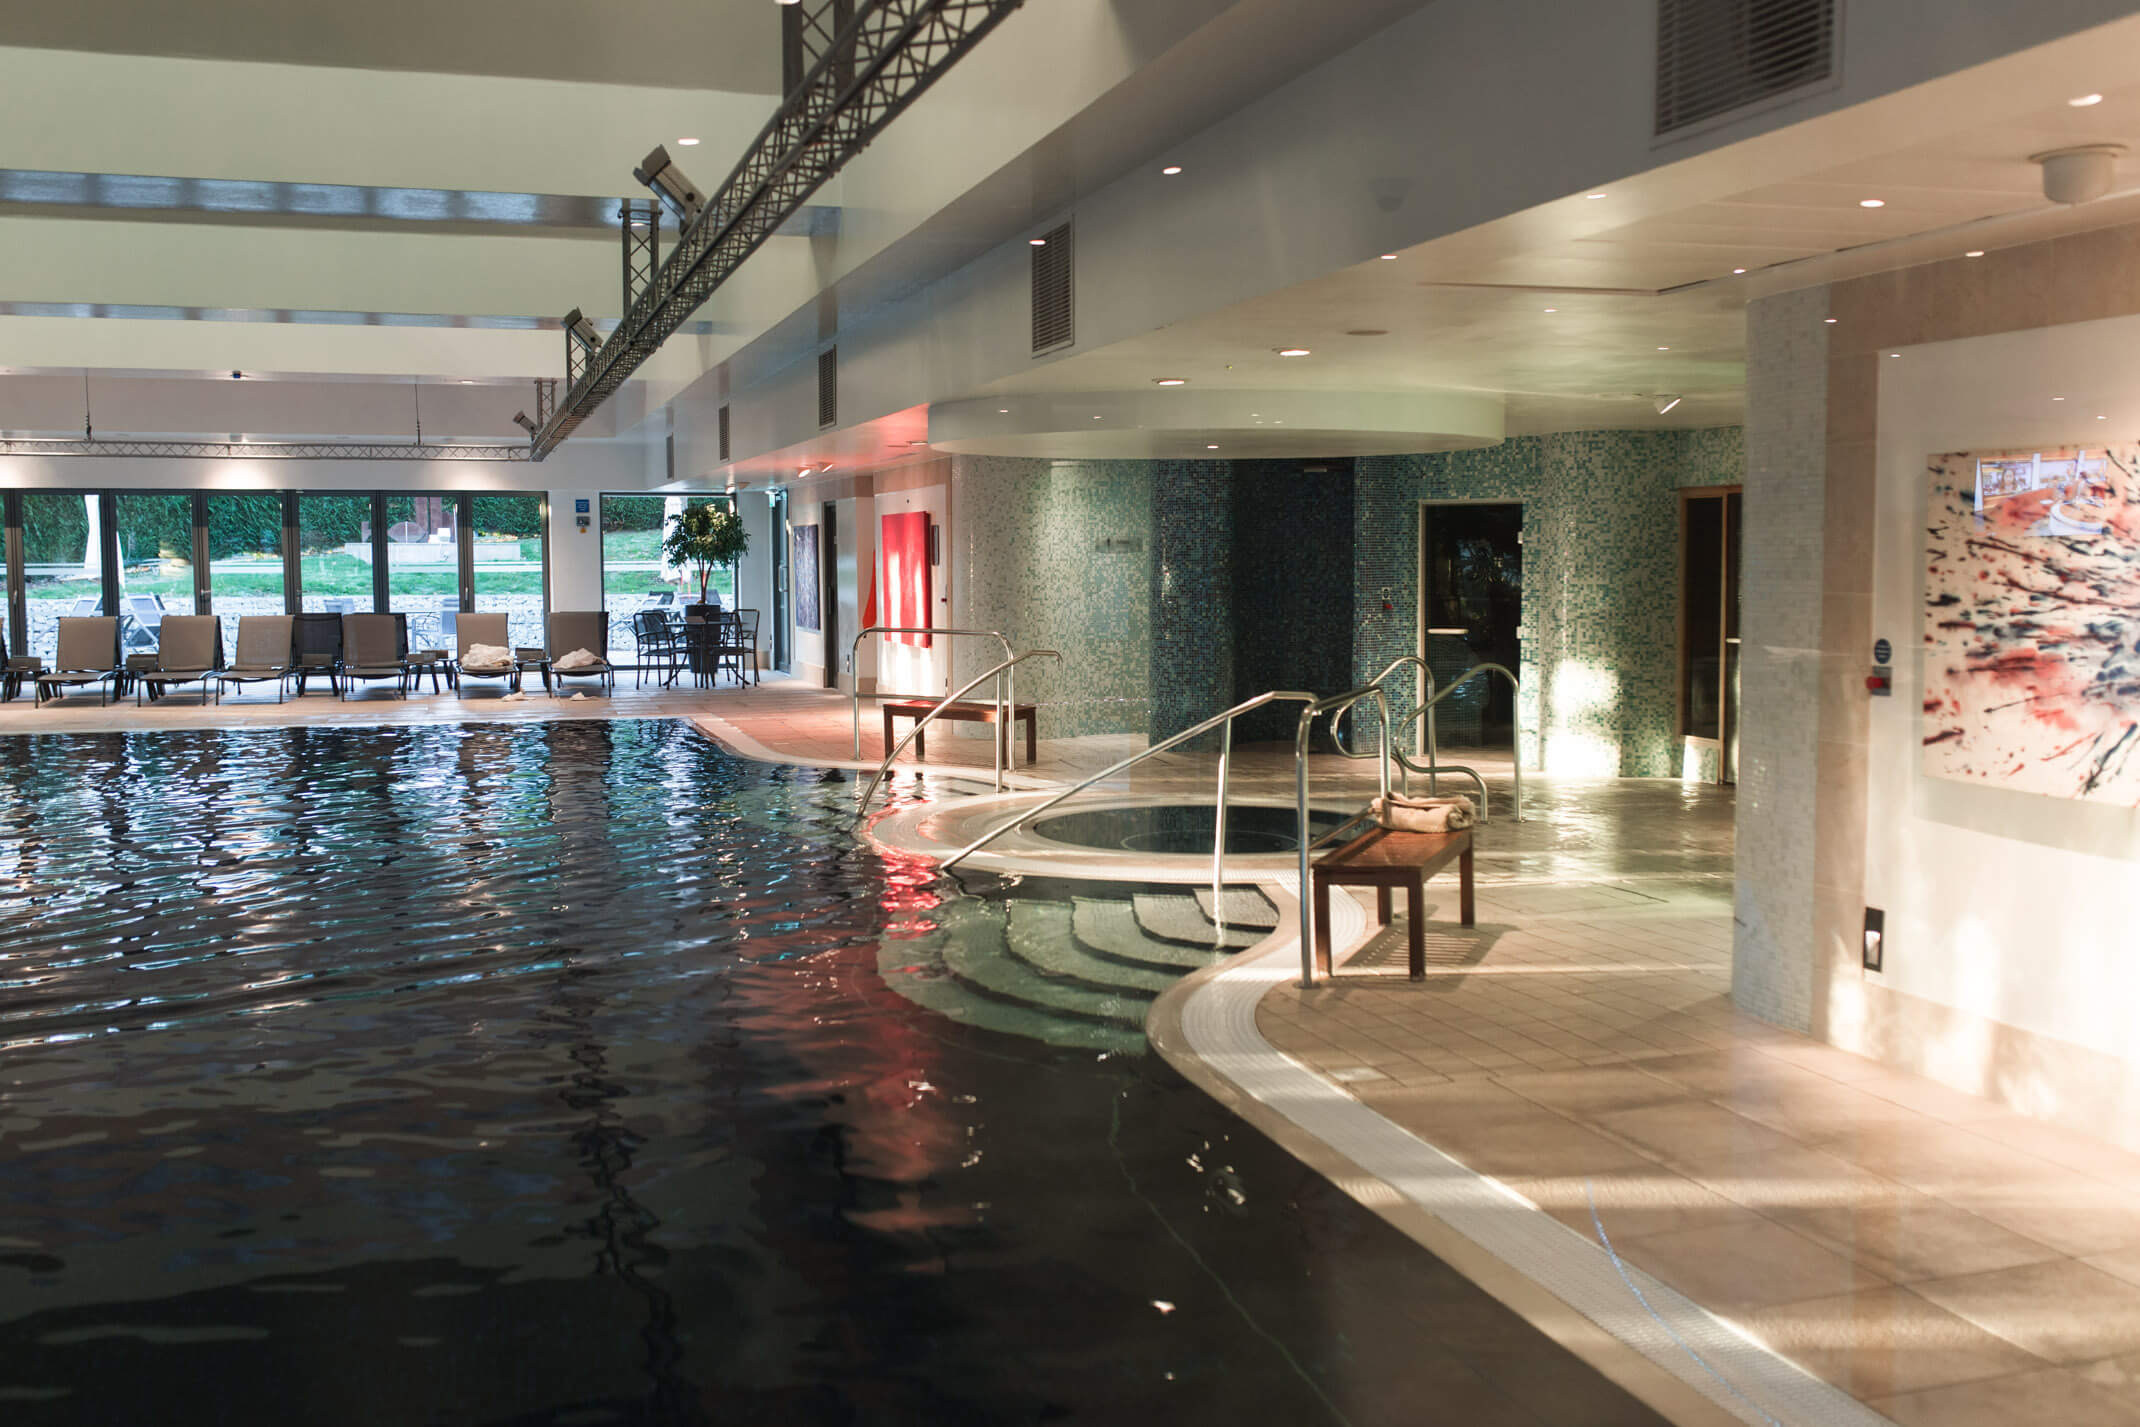 An overnight stay at Donnington Valley Spa and Hotel, Berkshire